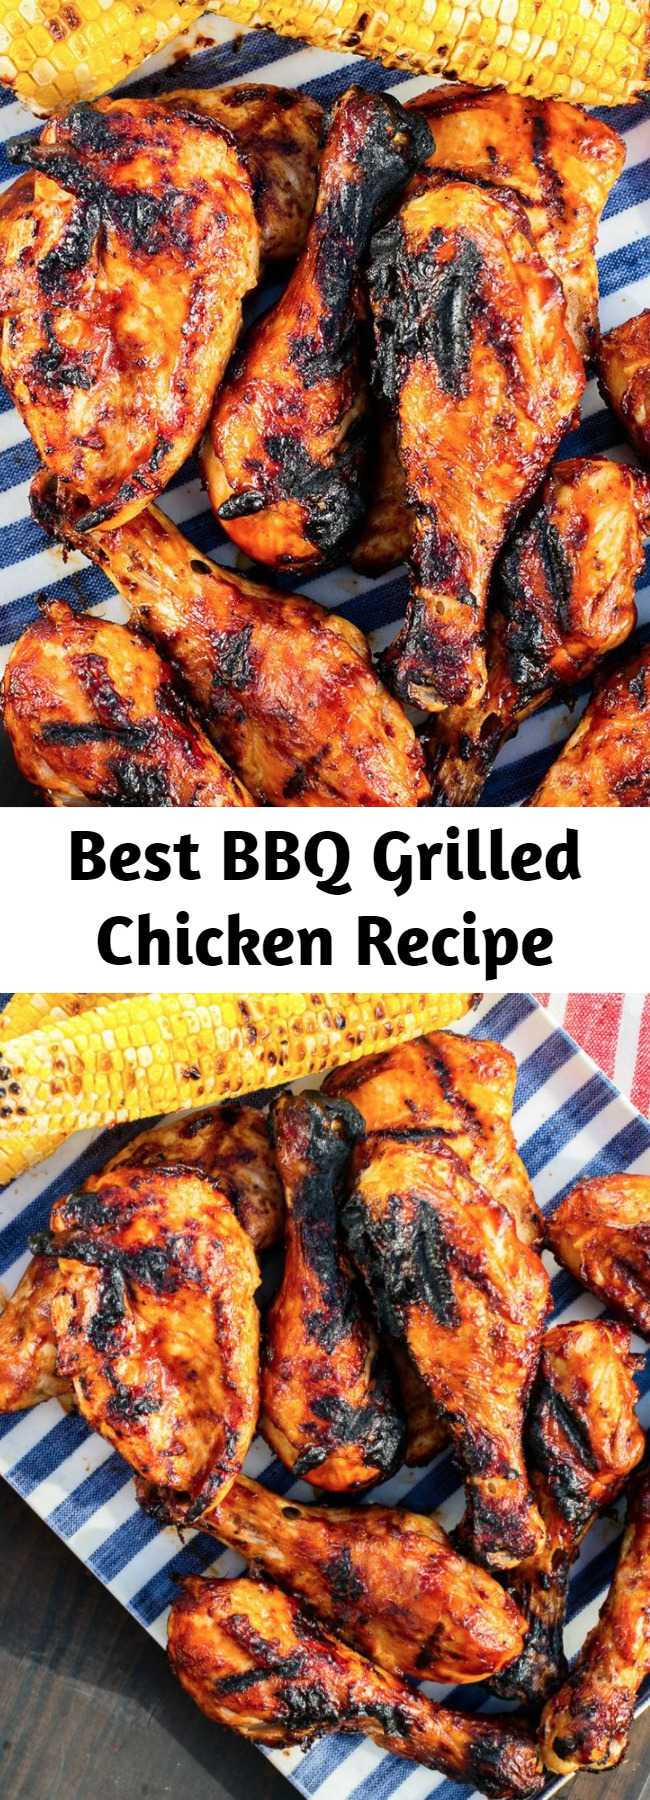 Best BBQ Grilled Chicken Recipe - Grilled chicken breast may not seem like the most exciting meat out there, but this homemade BBQ chicken recipe is affordable, easy, and always crowd-pleasing. Plus, it's healthy!